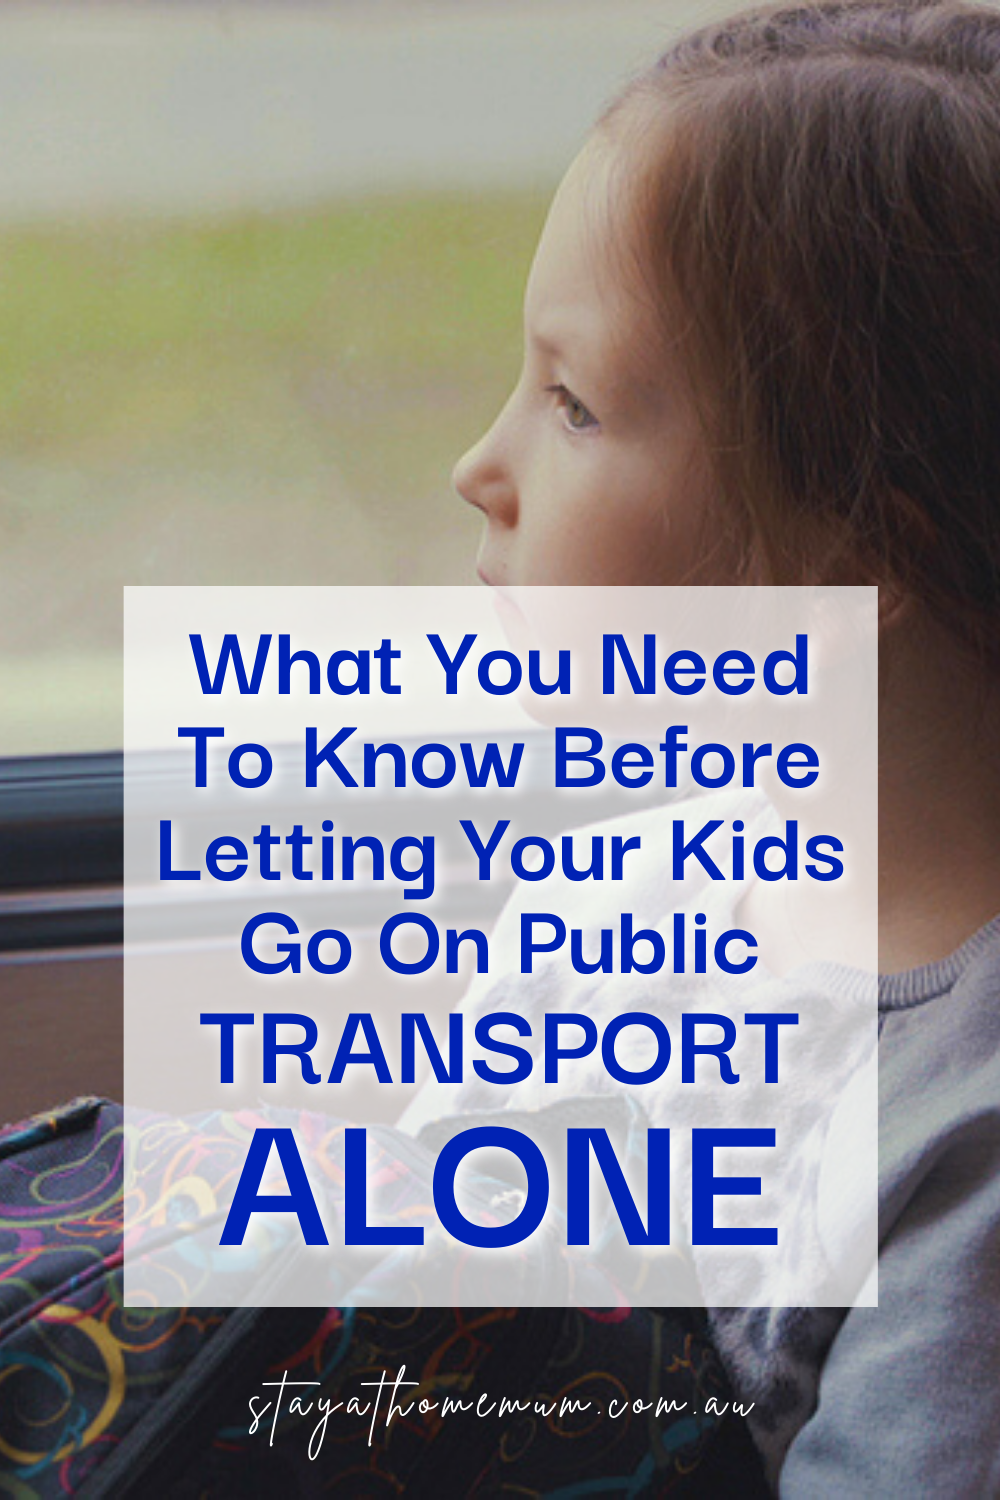 What You Need To Know Before Letting Your Kids Go On Public Transport Alone | Stay At Home Mum